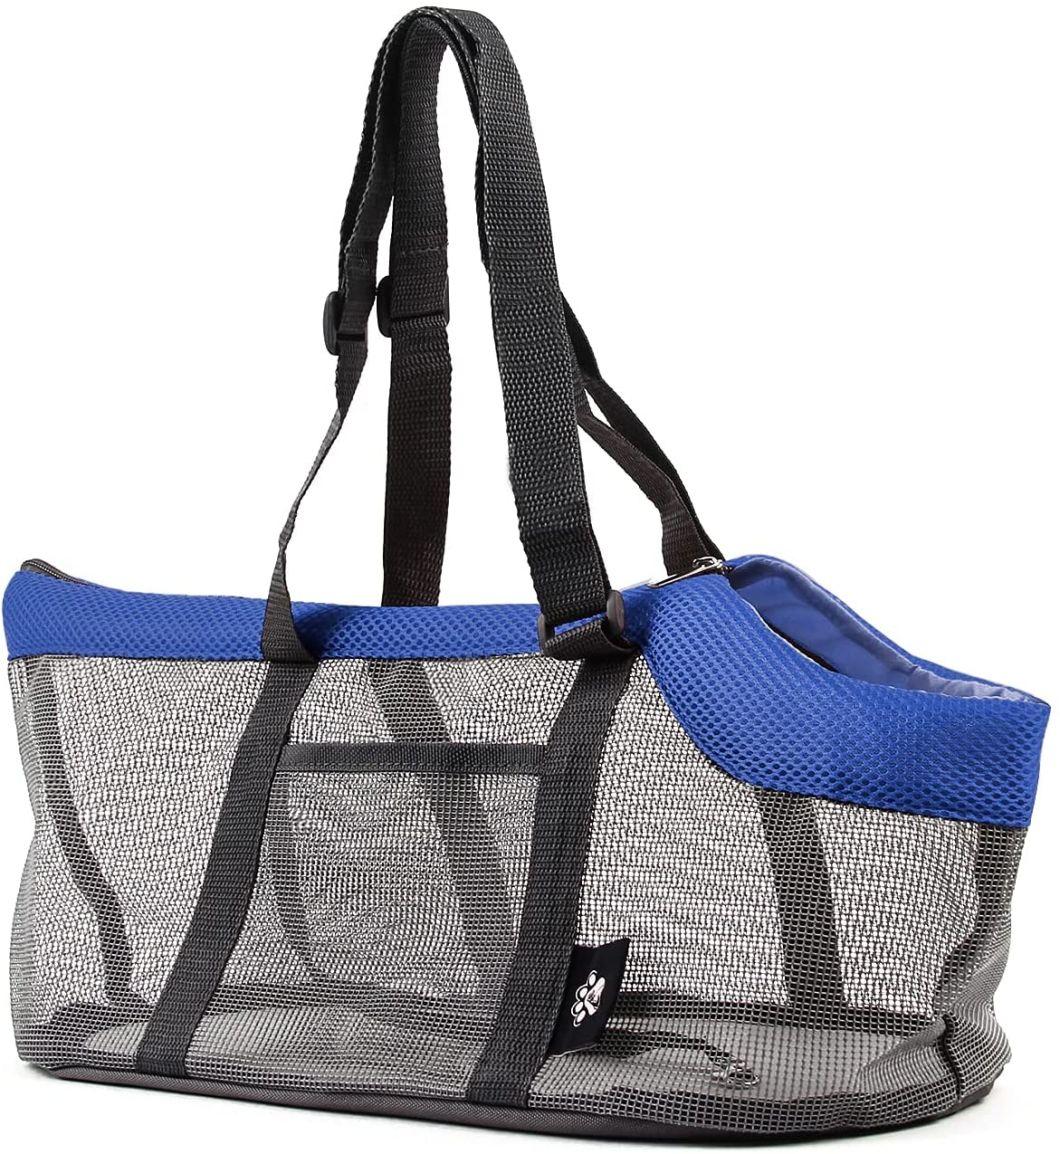 Portable Breathable Mesh Soft Sided Pet Carrier Bag for Cats Puppies